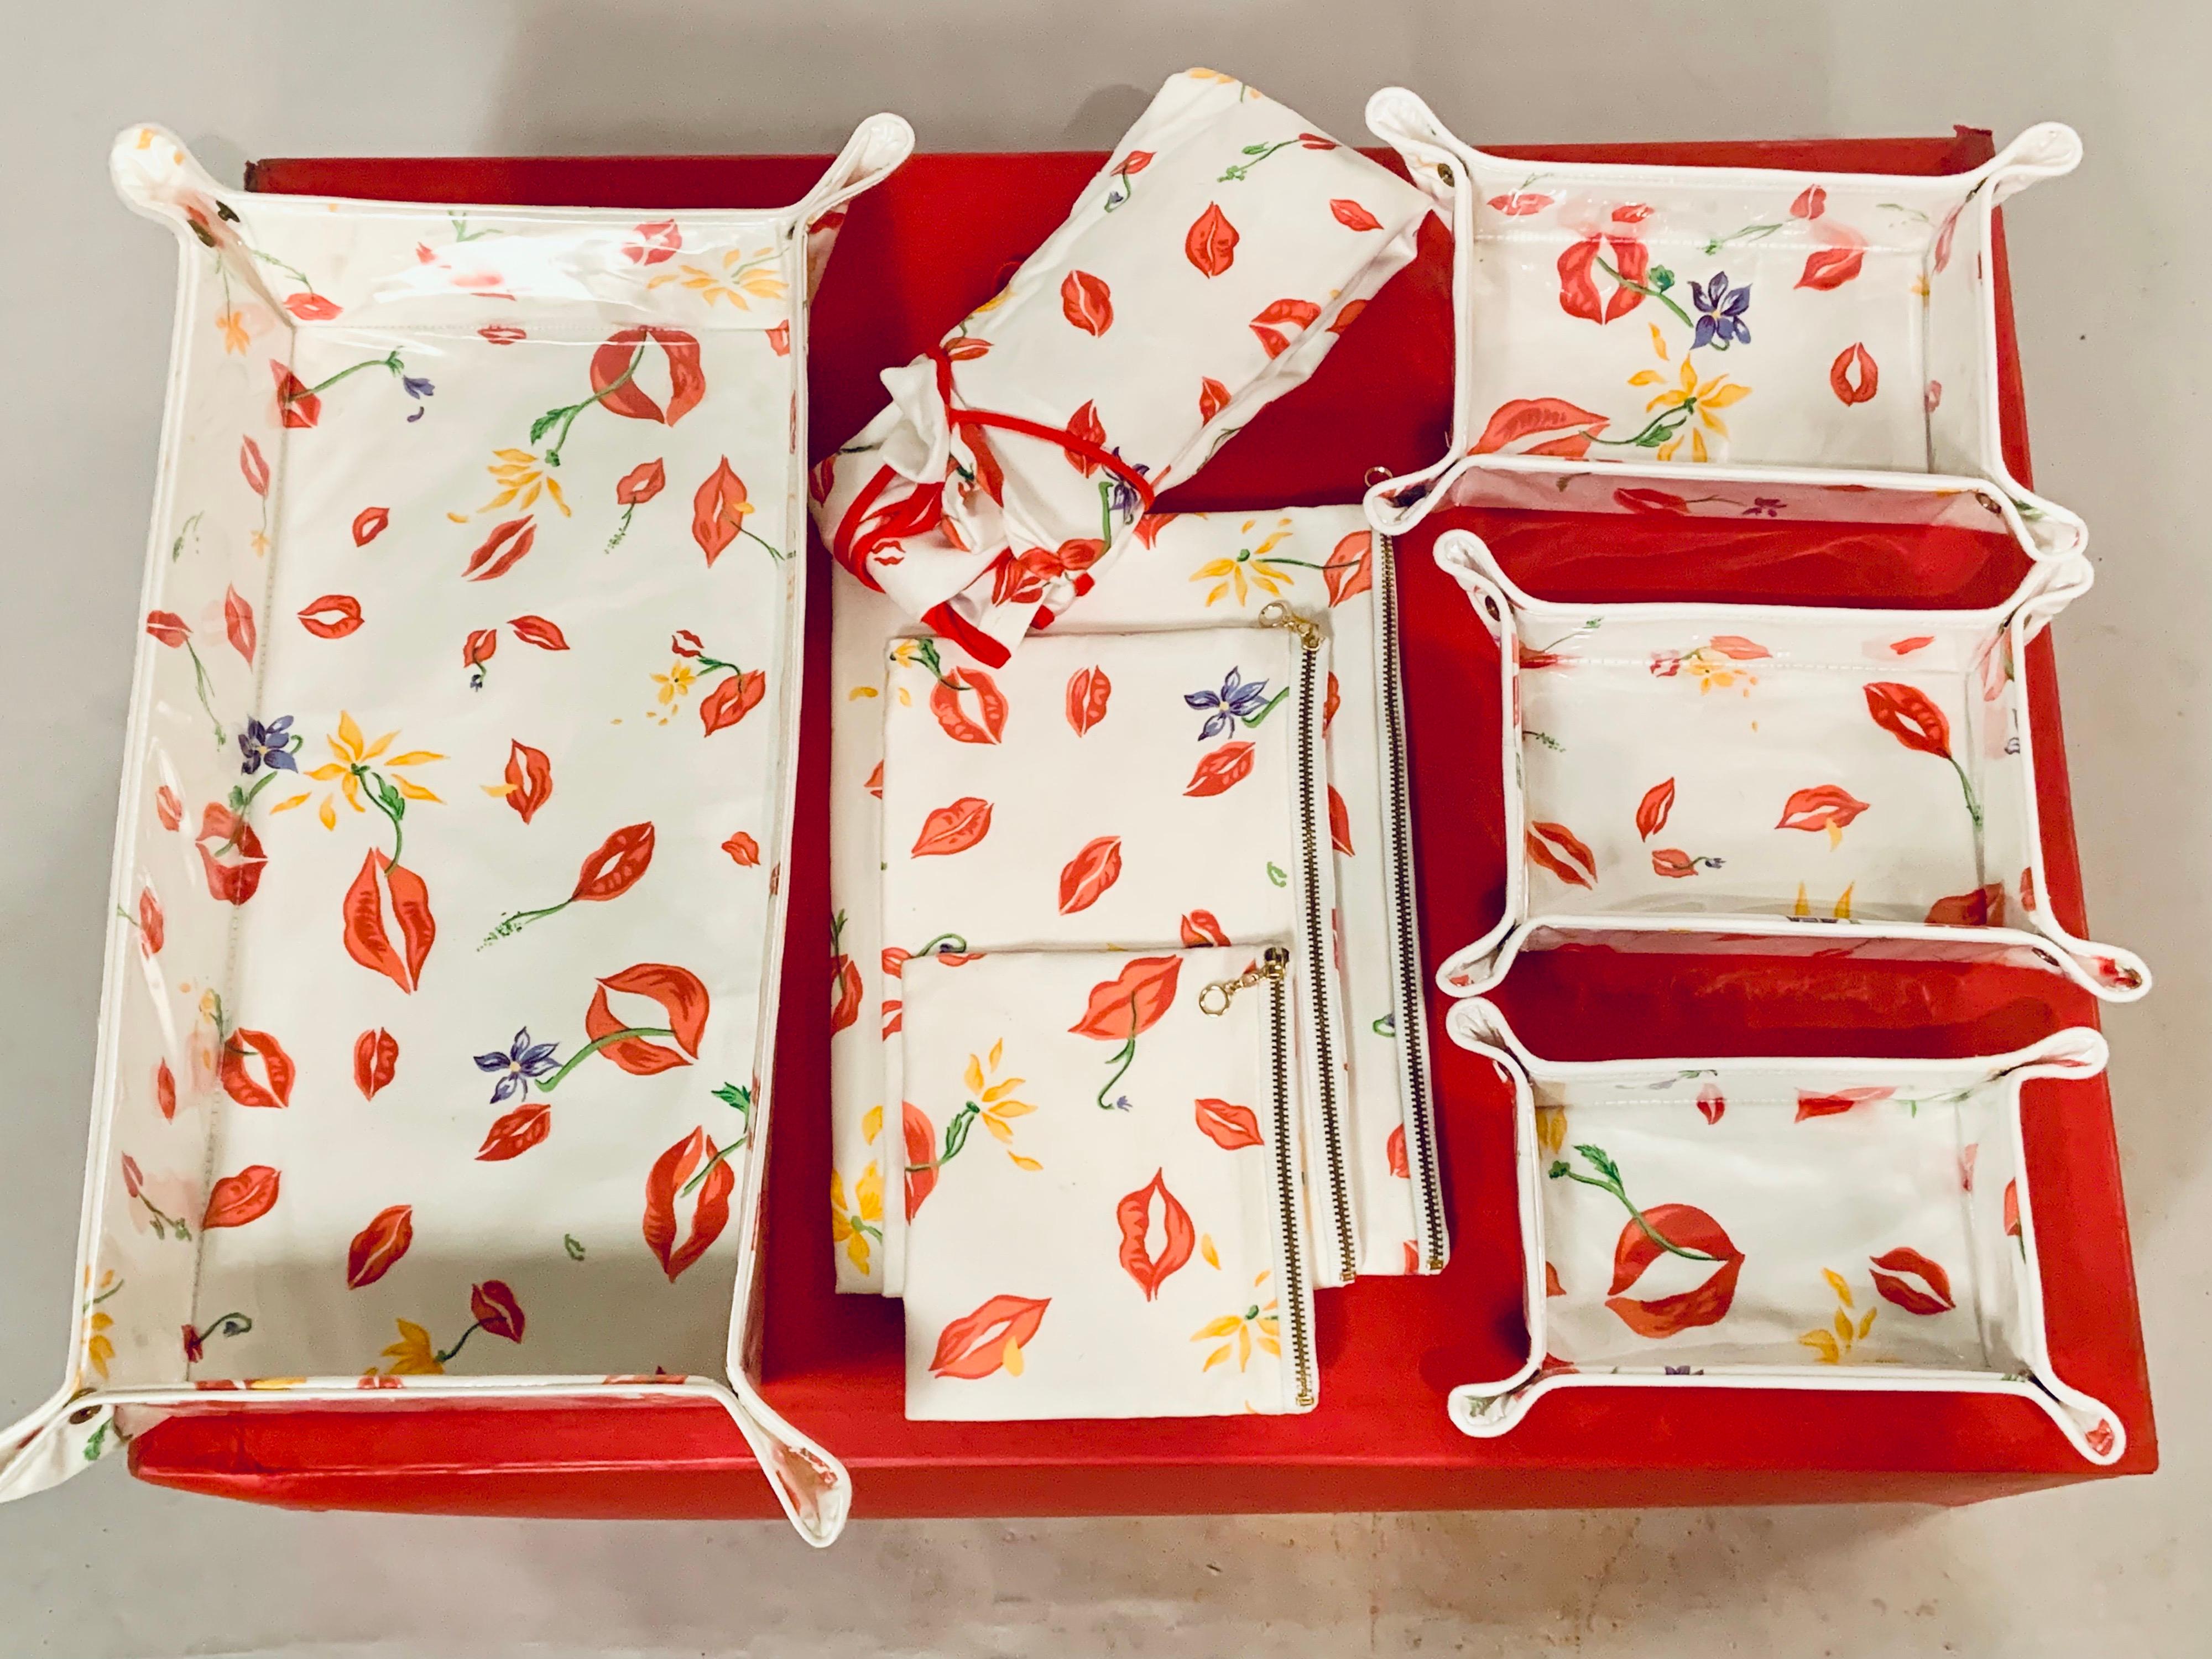 This eight piece group of D. Porthault Red Lips pattern travel accessories includes a large tray with a plastic cover, and a graduated set of three matching trays. All of these pieces snap together at the corners and then unsnap to pack flat in a